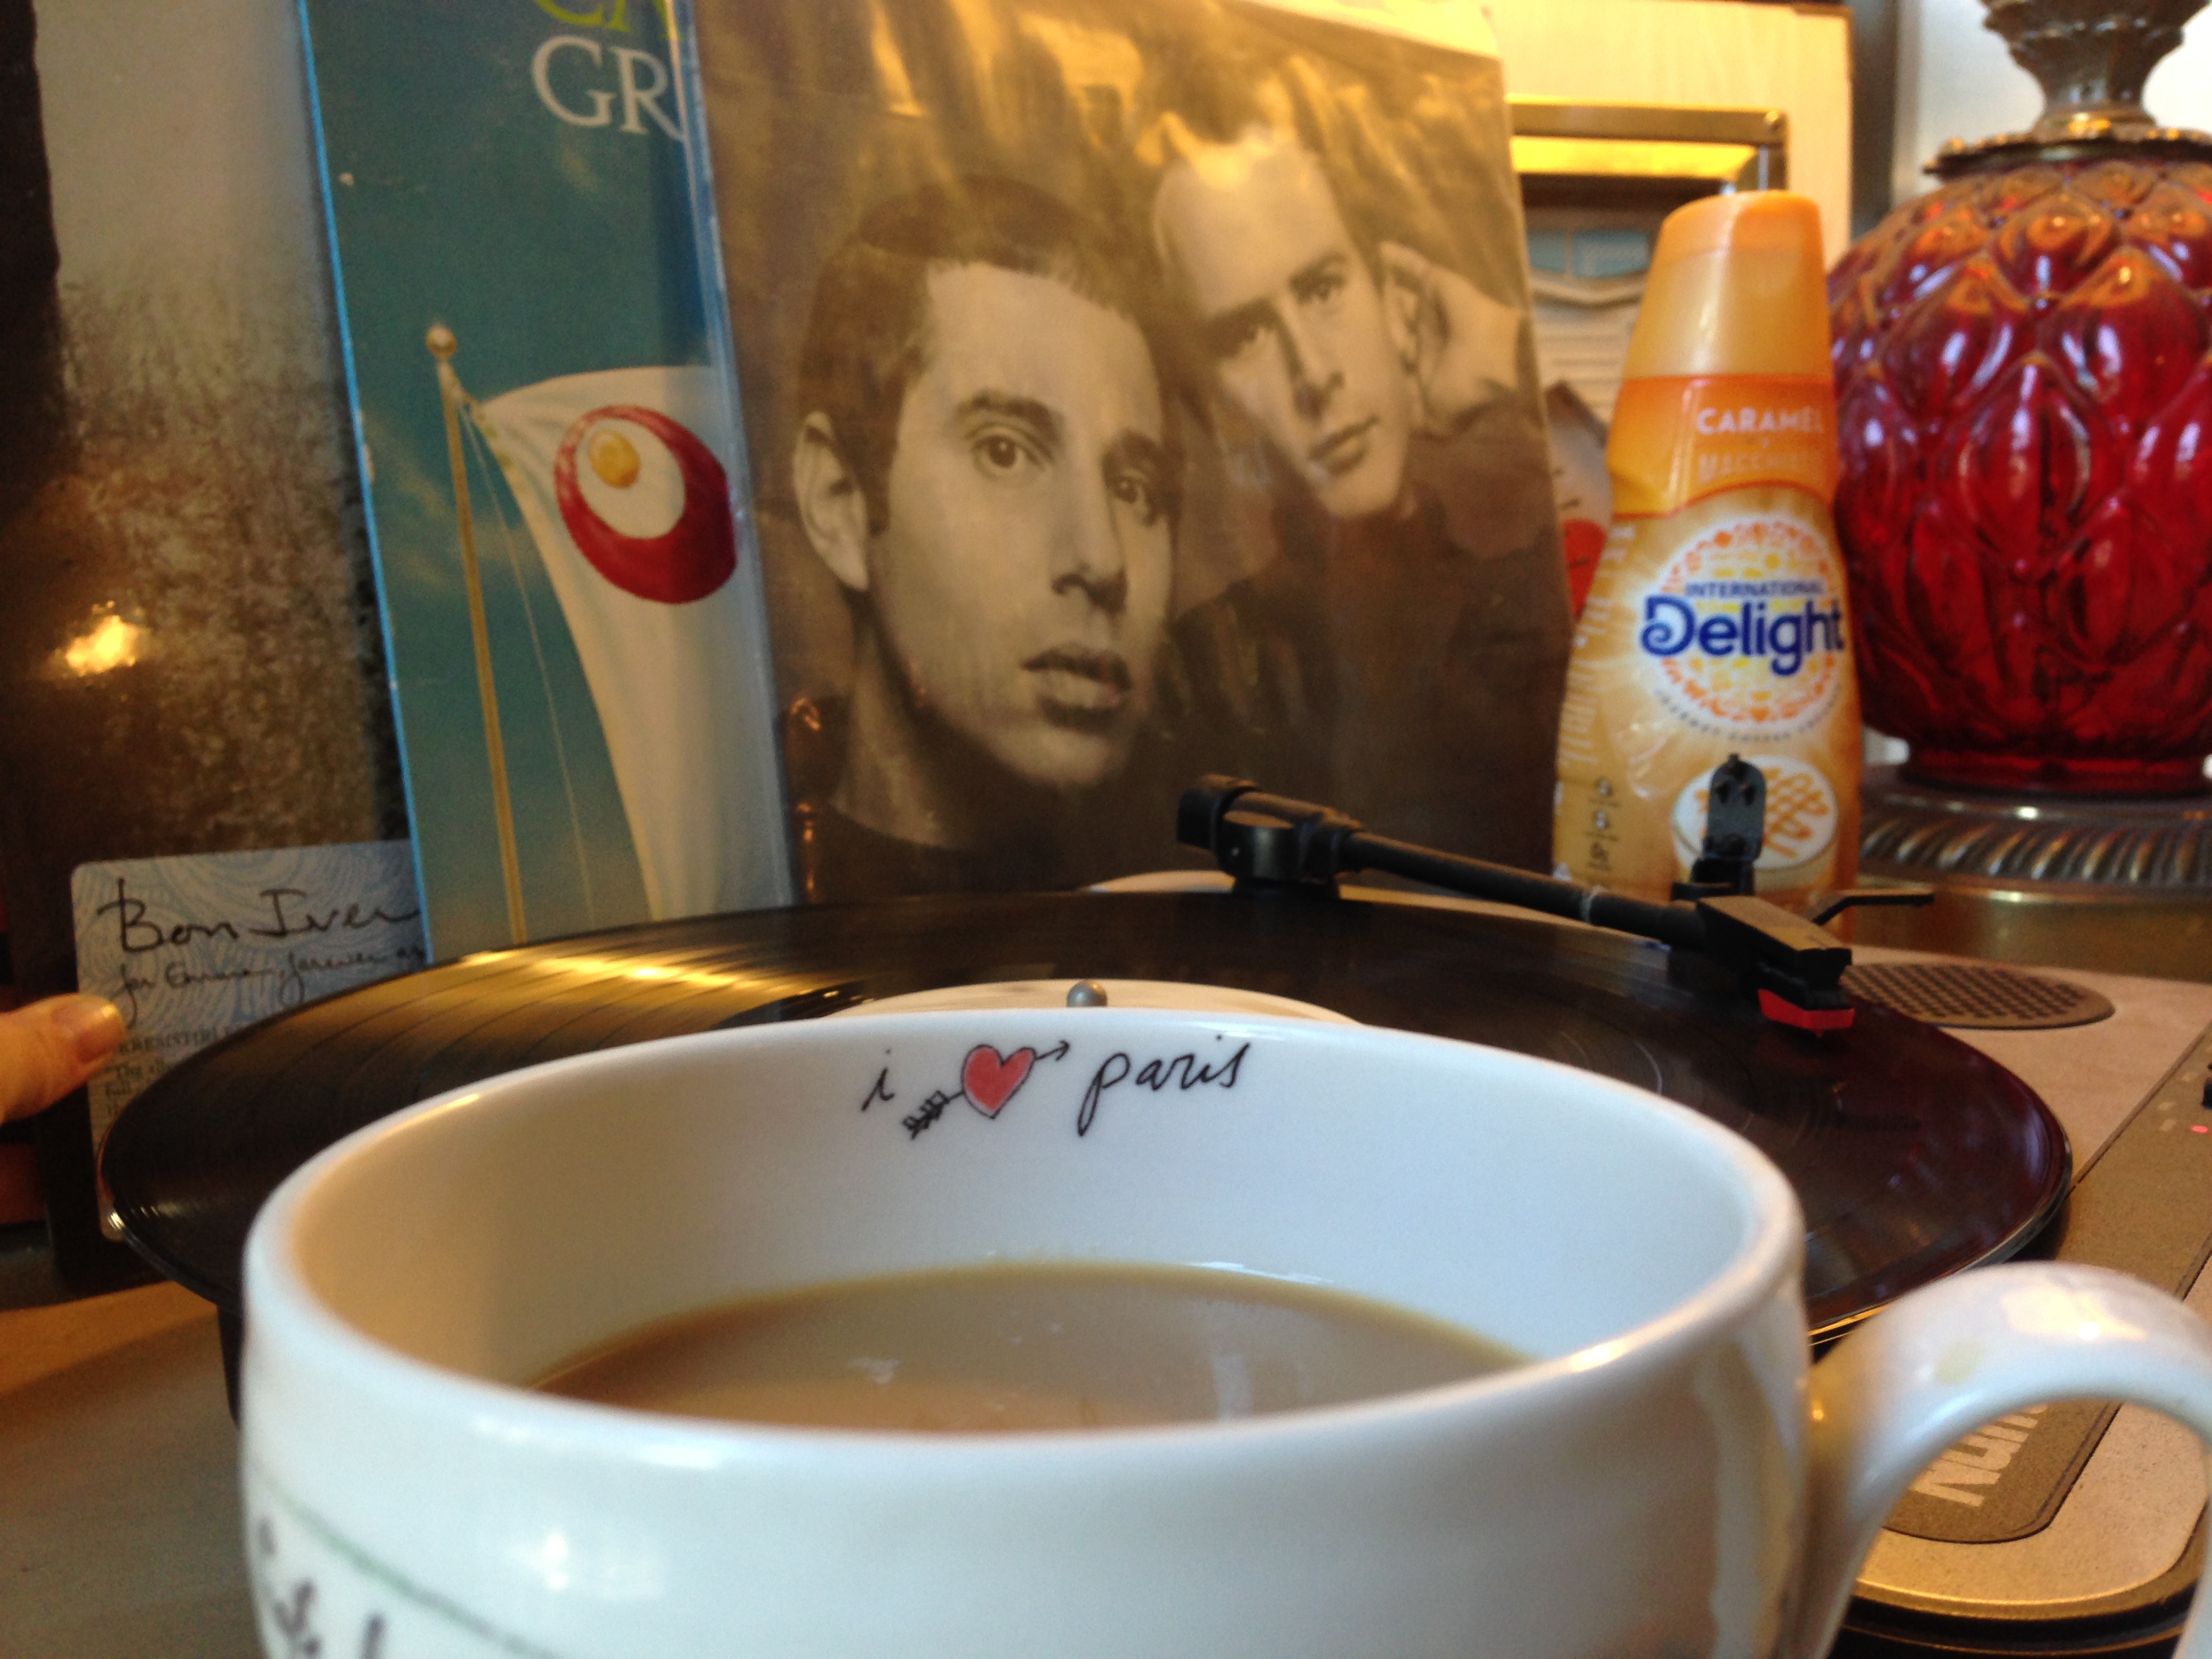 morning muse, bookends, simon and garfunkel